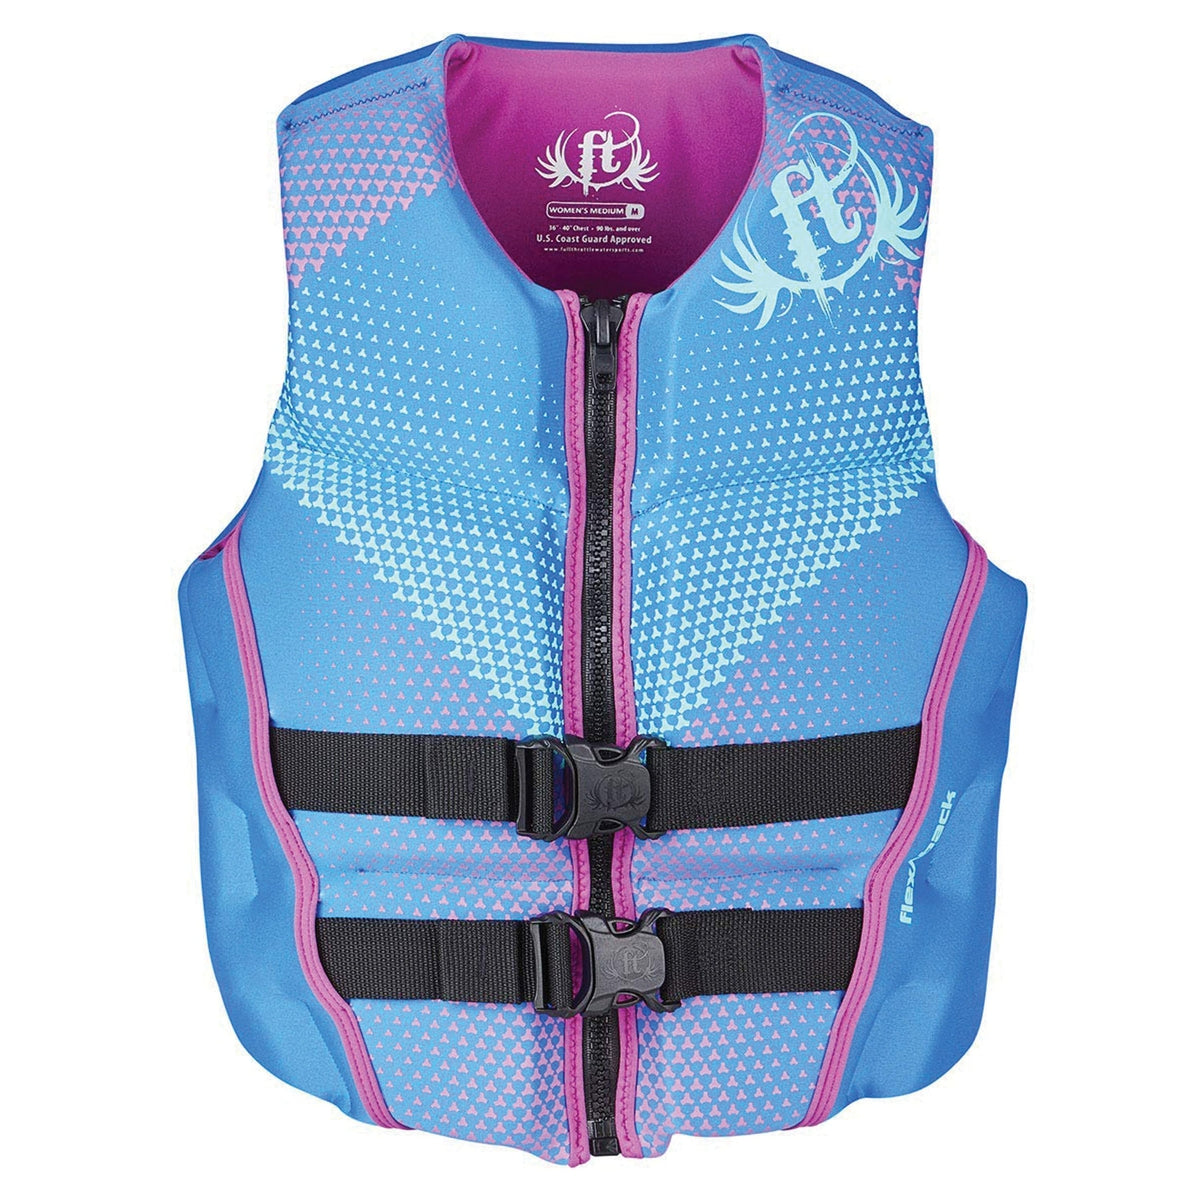 Full Throttle Qualifies for Free Shipping Full Throttle Vest Lady XL Blue Rapid Dry #142500-500-850-19